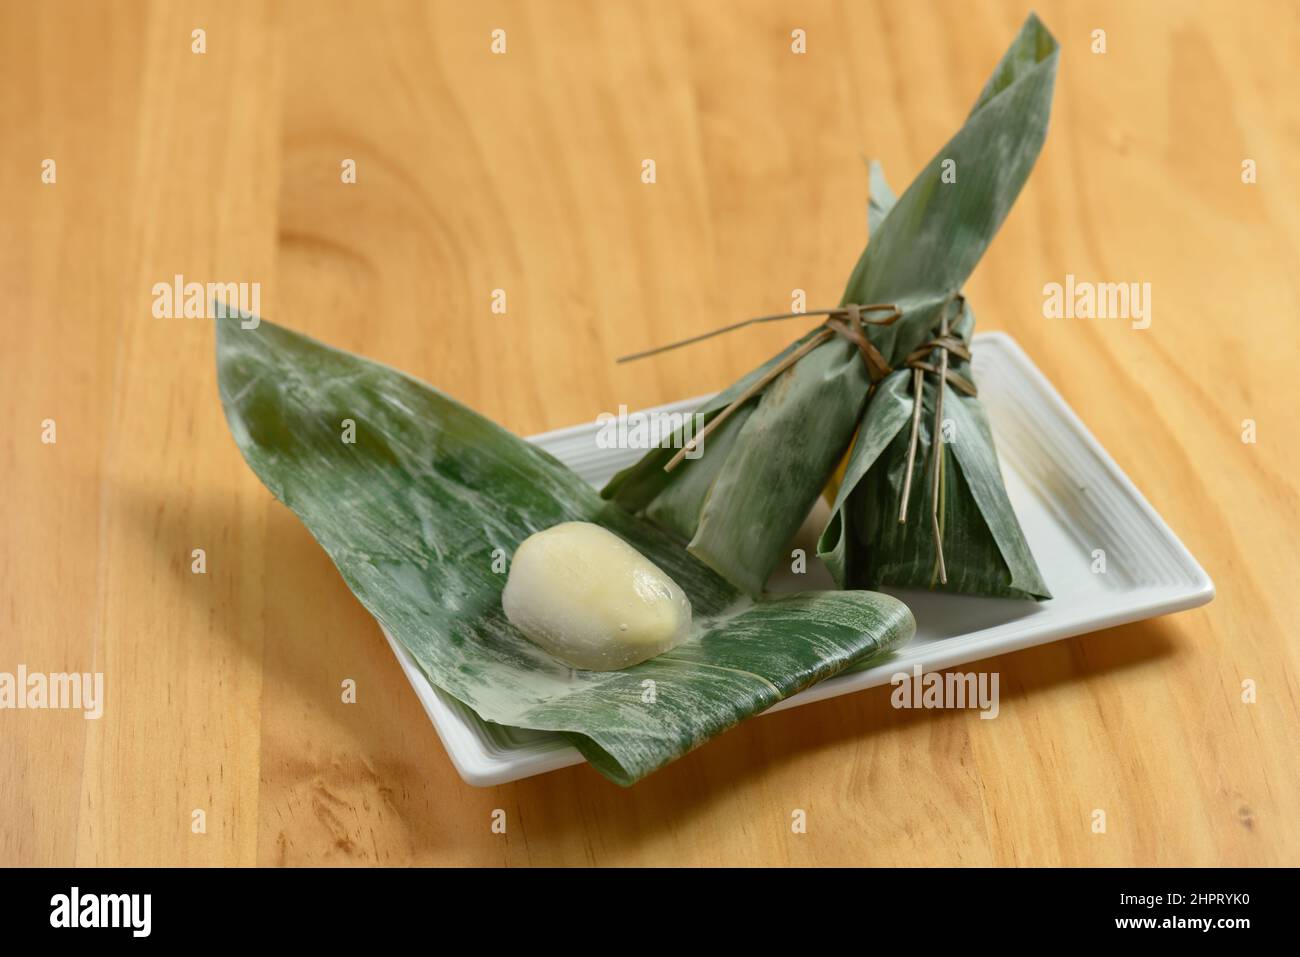 Japanese food sasa mochi rice cake wraps with banana leaf in a dish isolated on wooden background top view Stock Photo